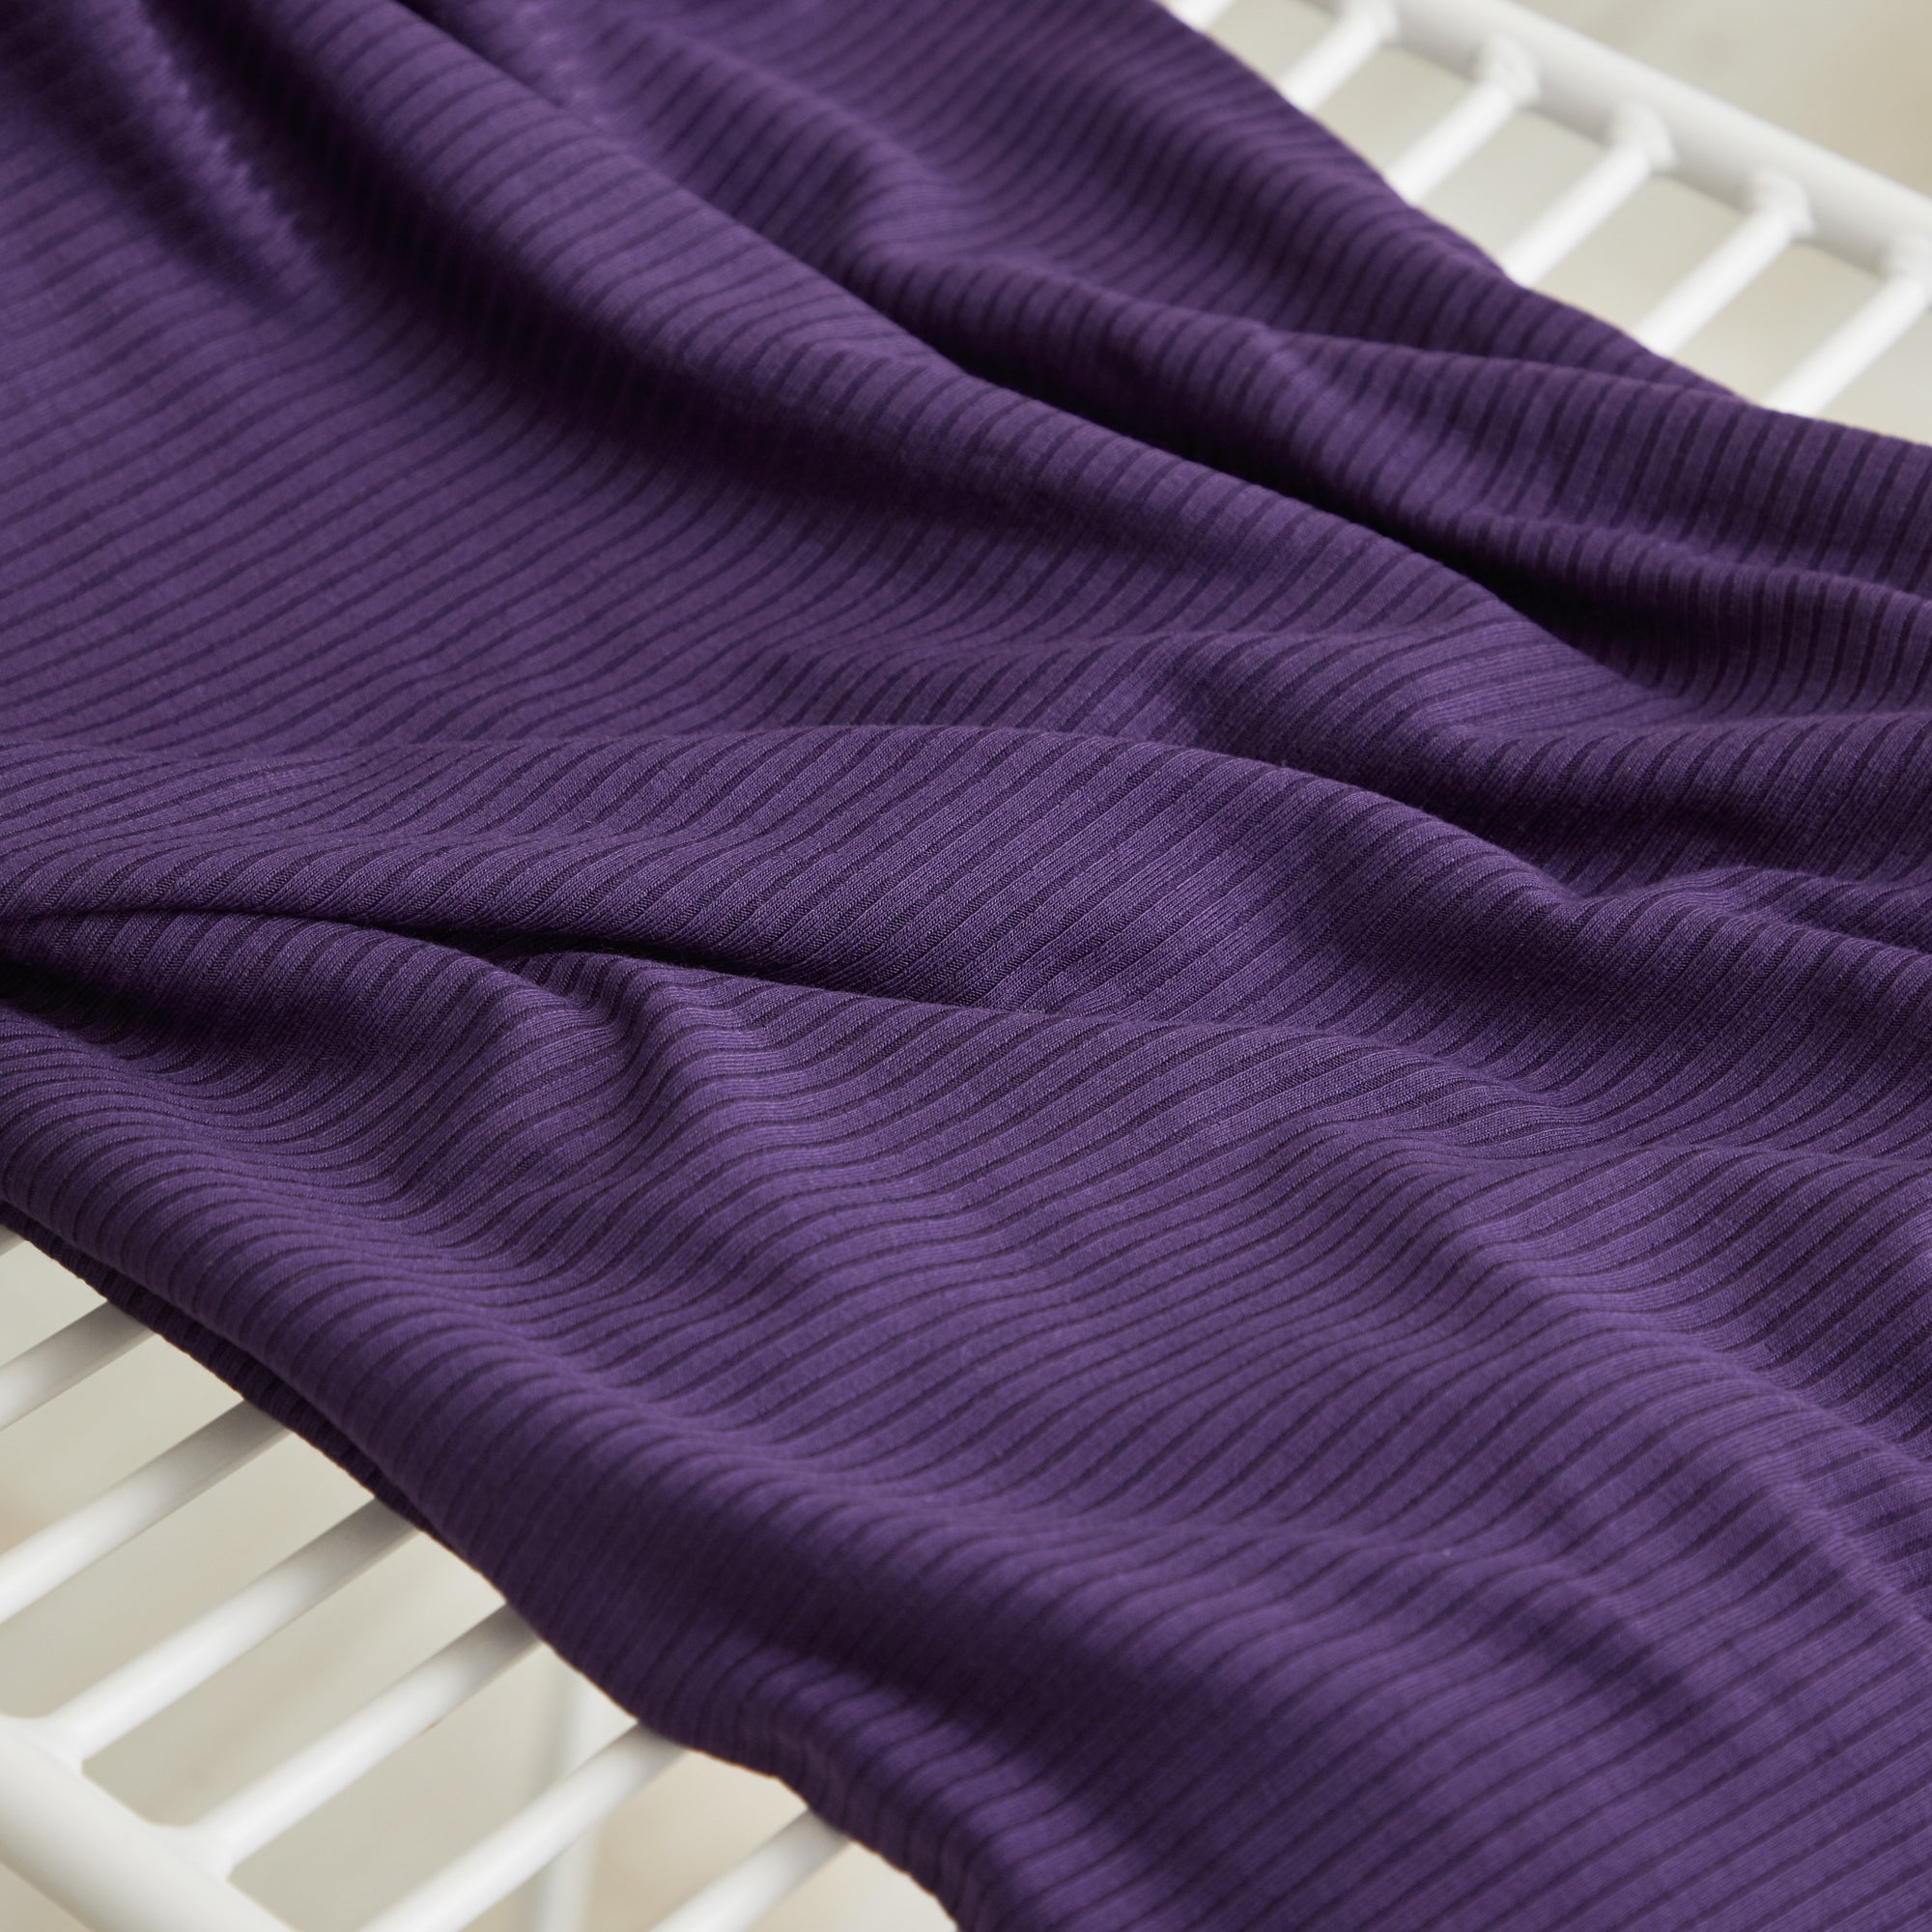 REMNANT 1.3 Metres - Derby Ribbed Jersey Purple Night with TENCEL™ Modal Fibres